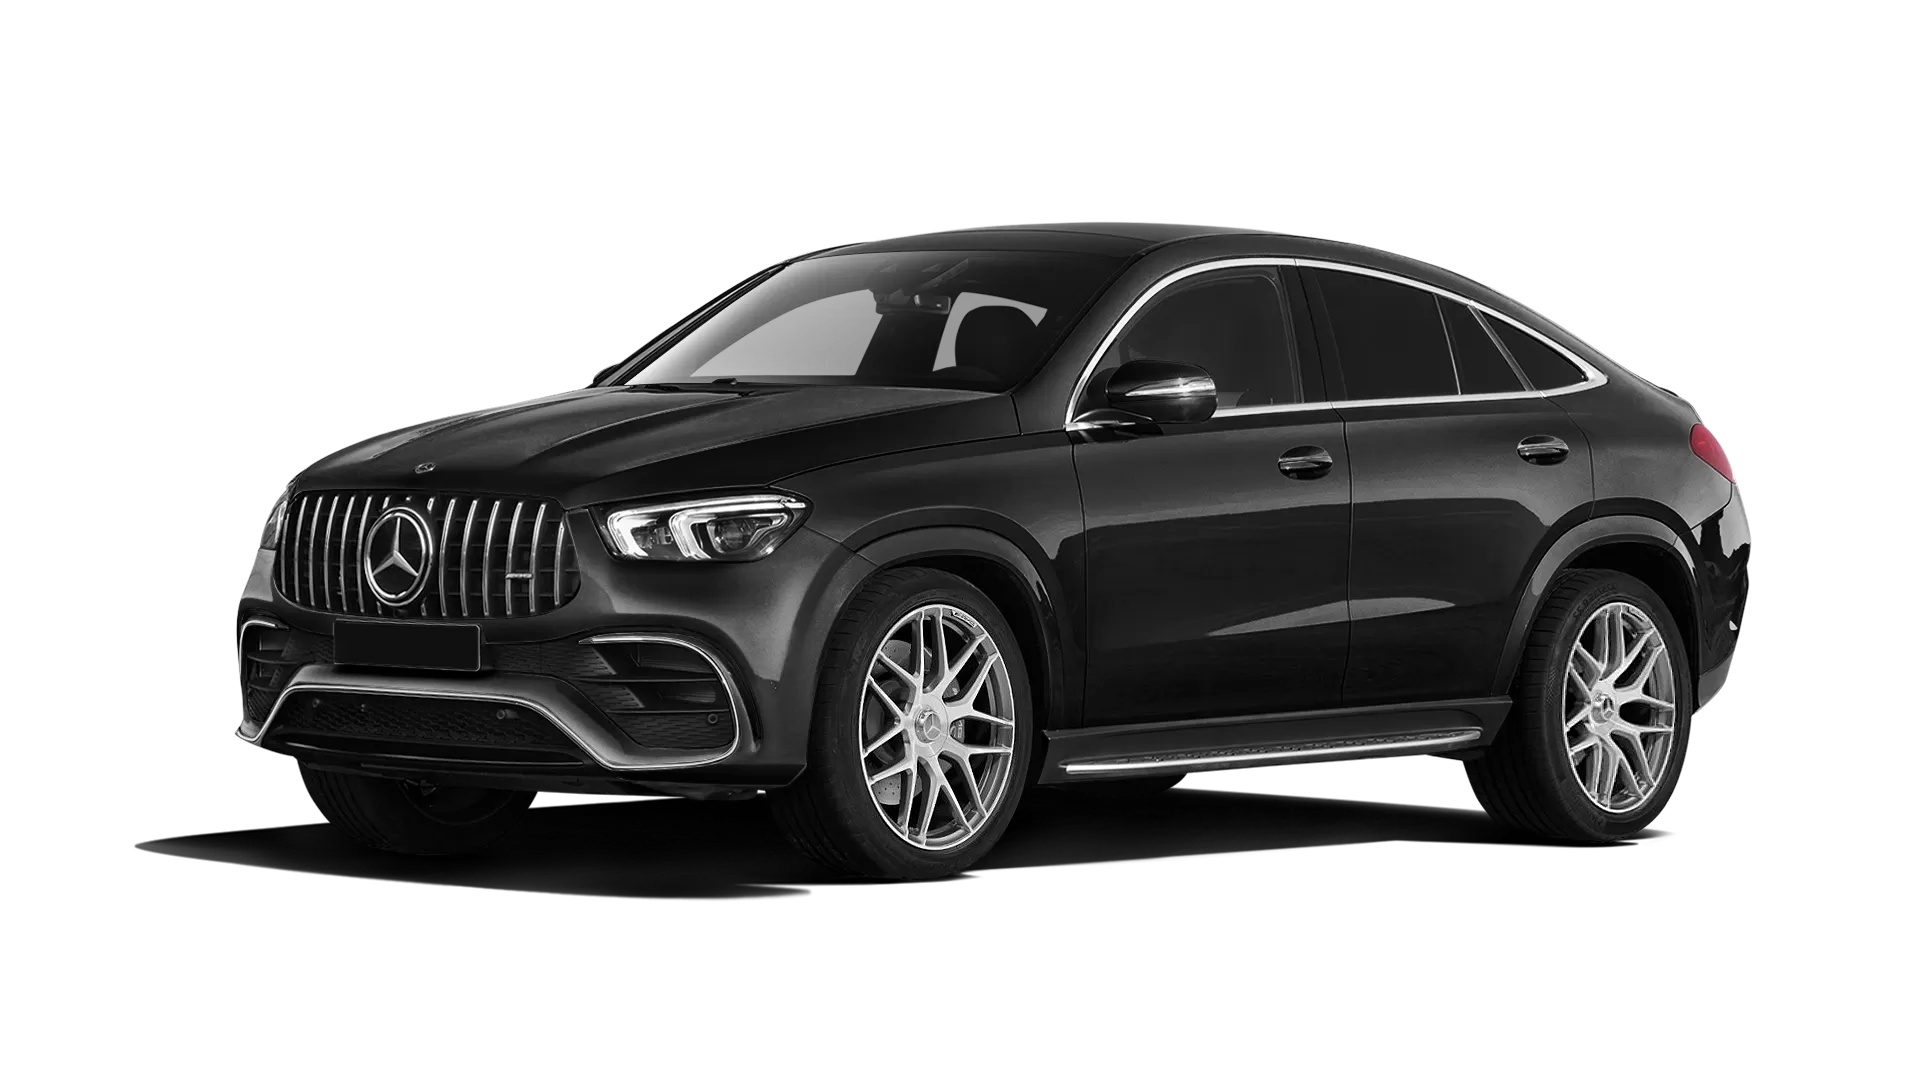 Mercedes GLE Coupe AMG 63 C167 stock front view in Black Non-Metallic color